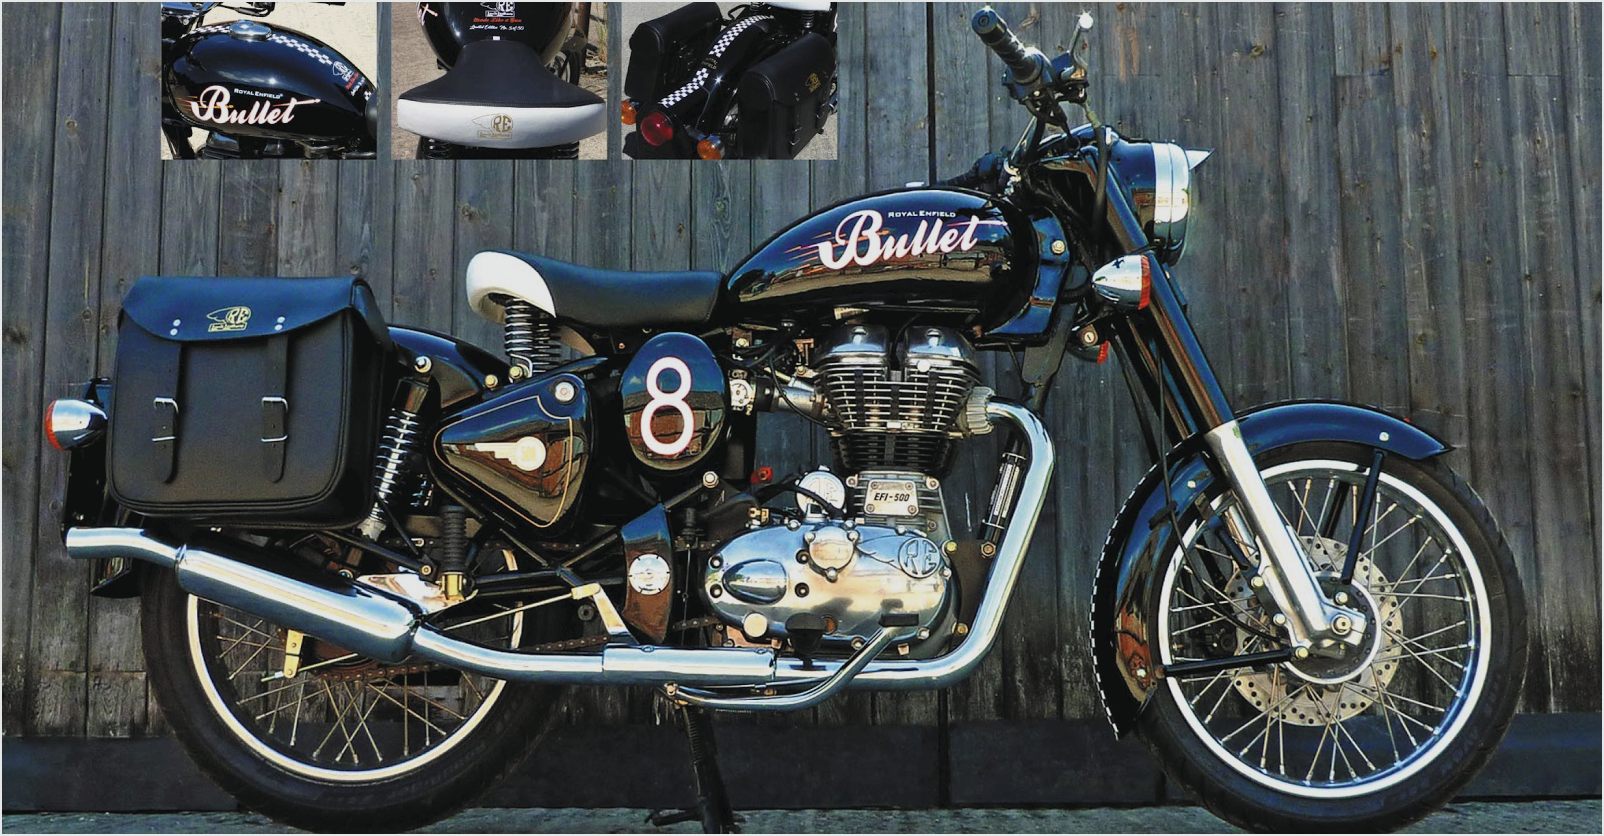 Enfield US Classic 500 #7